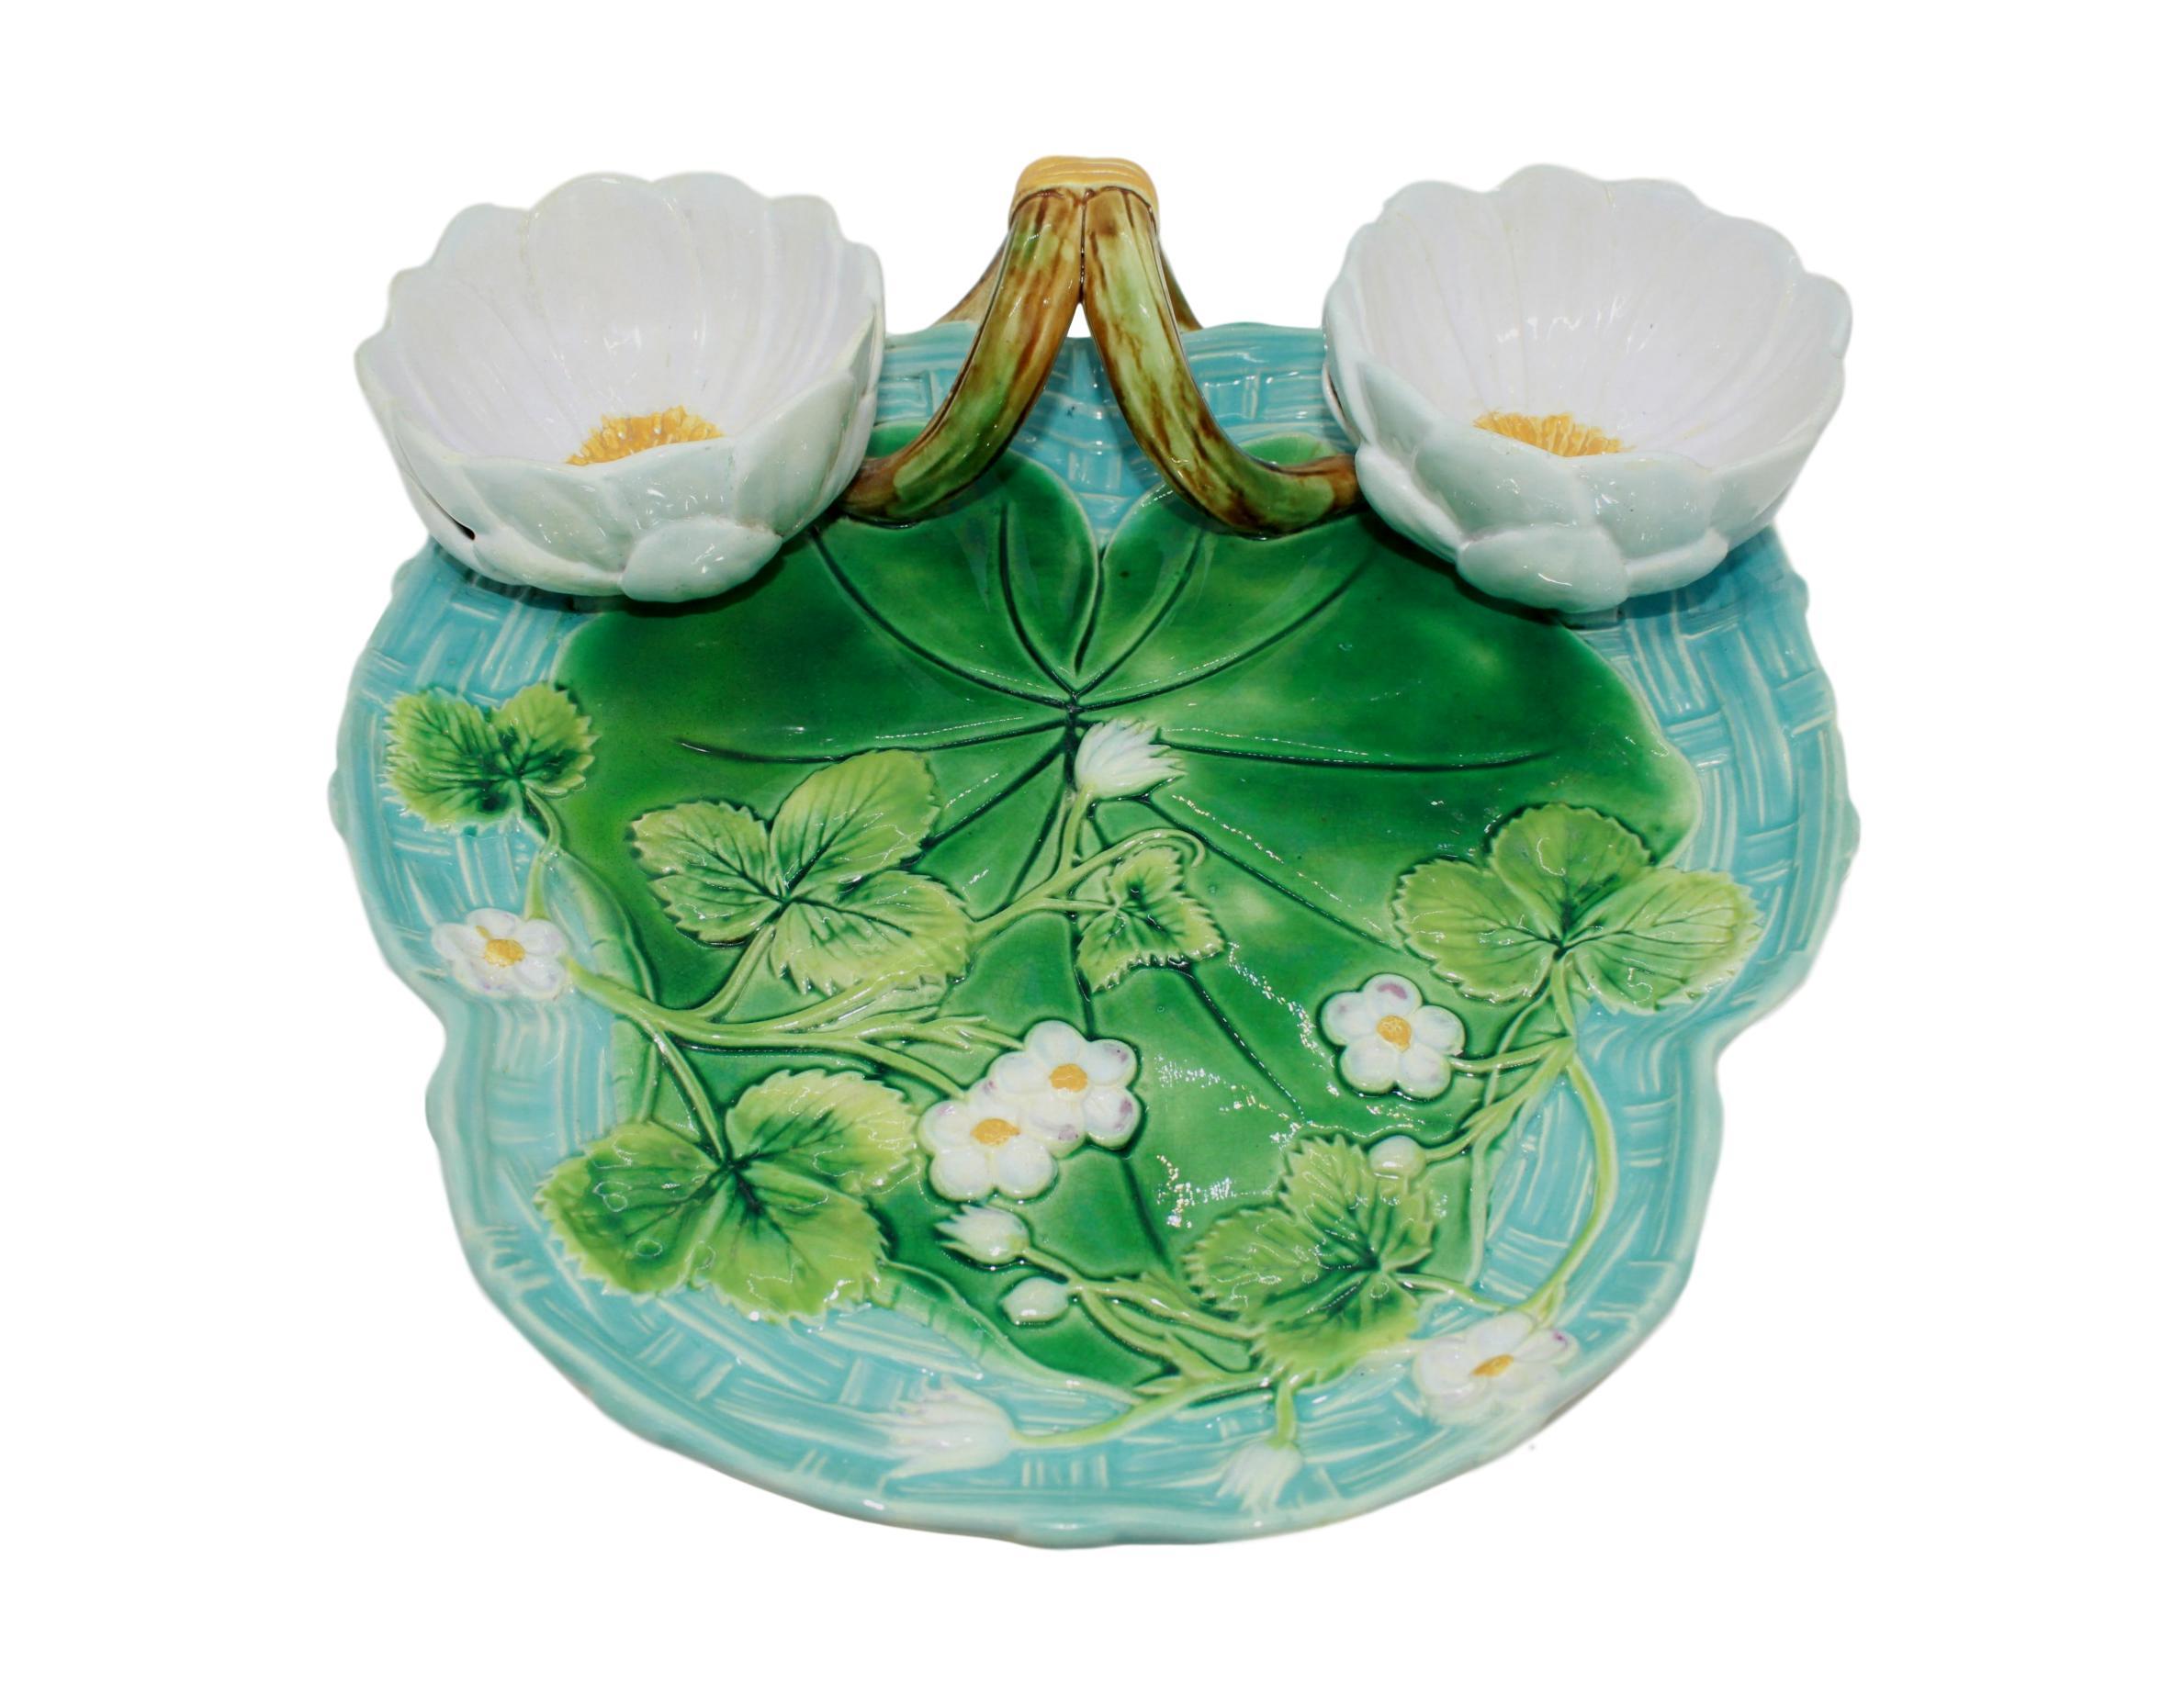 George Jones Majolica Strawberry Server, Turquoise and Green, with yellow-banded mossy twigs forming the handle, the platter with a large green-glazed lily pad and trailing strawberry leaves and blossoms, on a turquoise blue glazed basket-weave